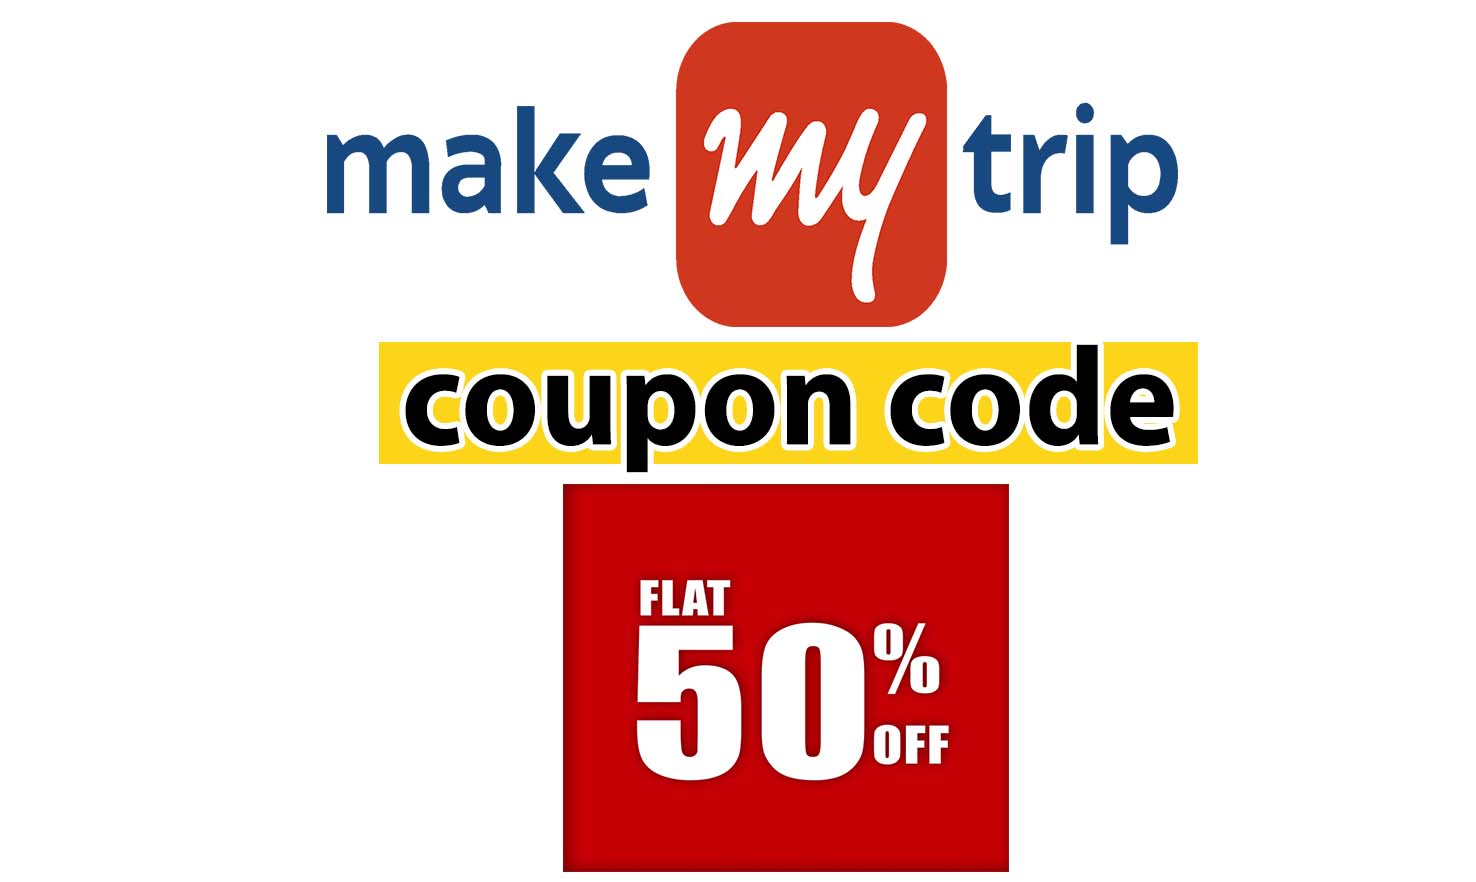 Make My Trip coupon code for Flight Ticket 2019